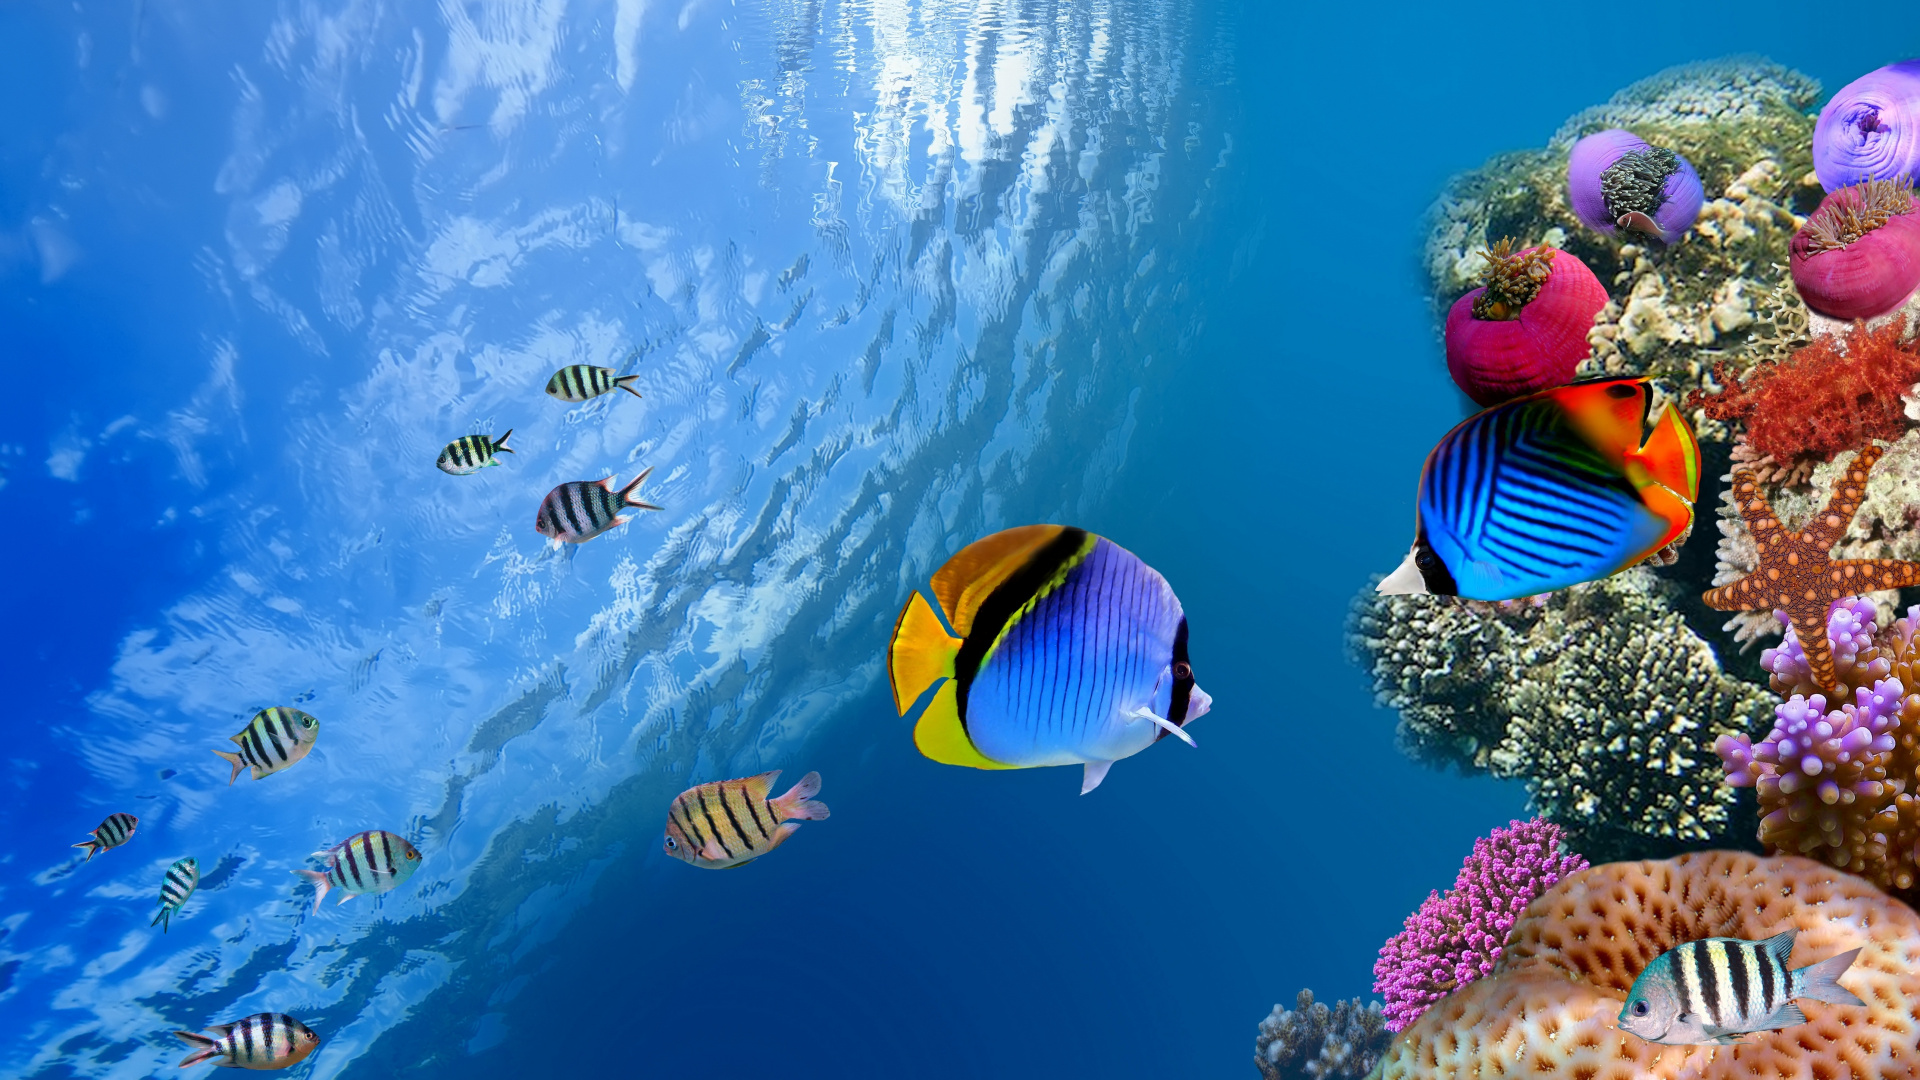 Man in Blue and White Striped Shirt With Blue and Yellow Fish in Water. Wallpaper in 1920x1080 Resolution